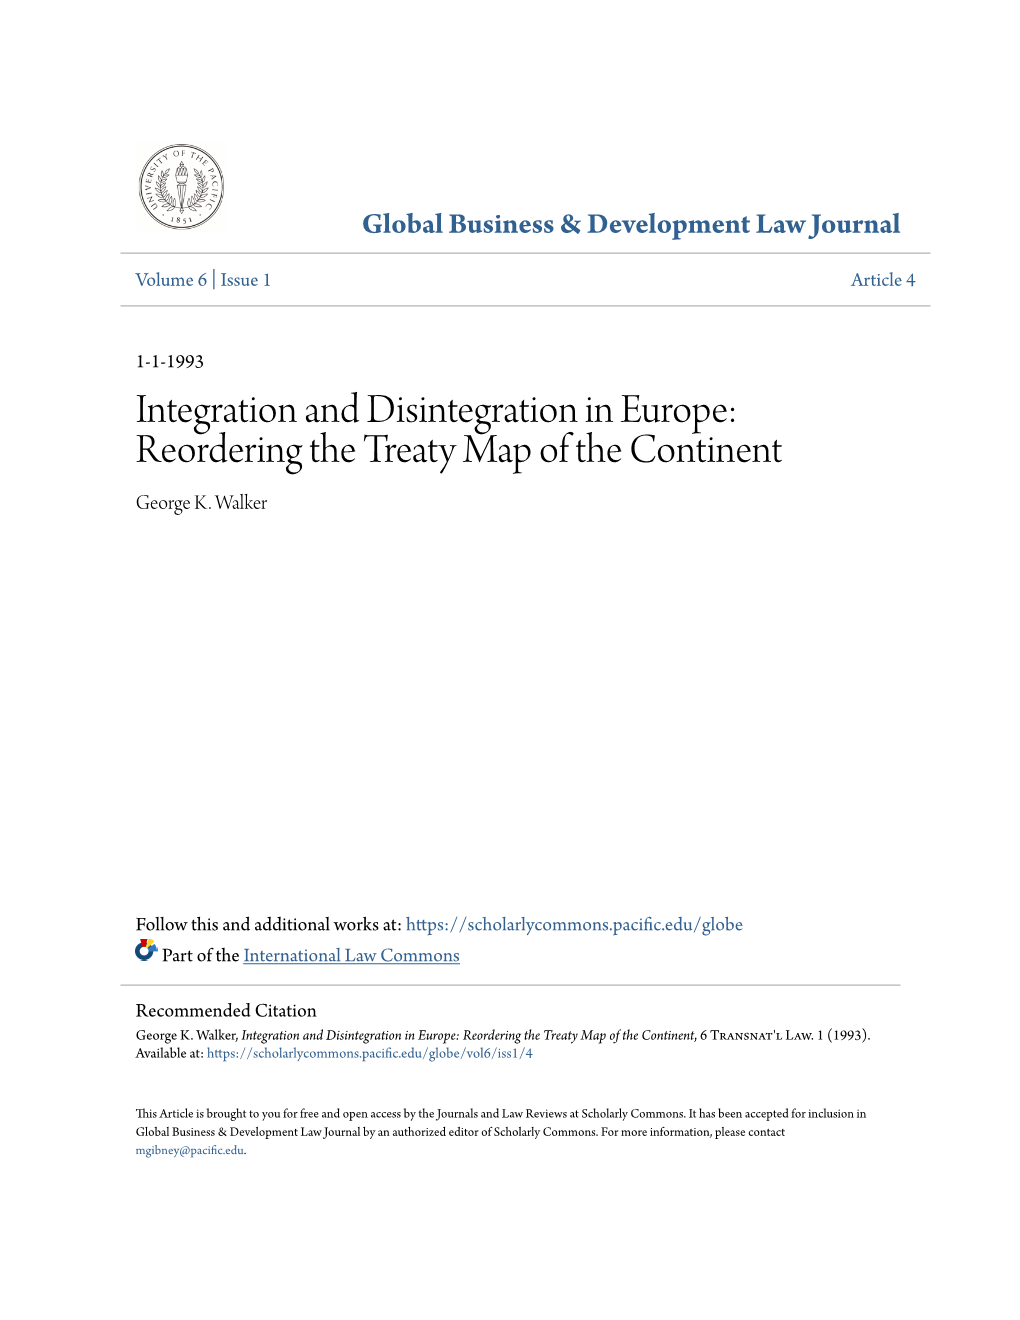 Integration and Disintegration in Europe: Reordering the Treaty Map of the Continent George K